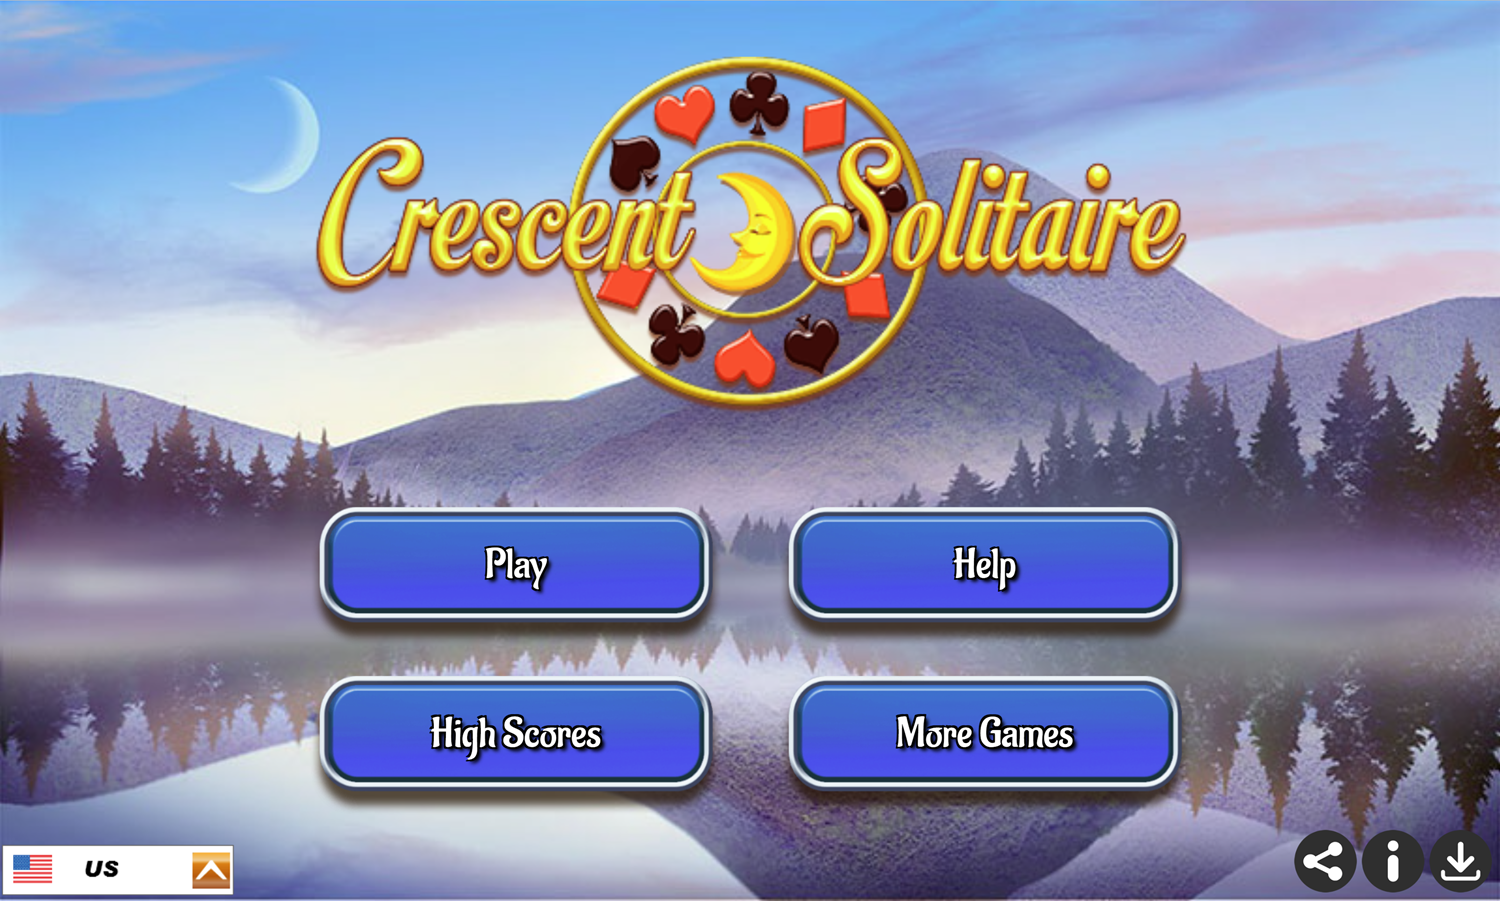 Crescent Solitaire Game Welcome Screen Screenshot.